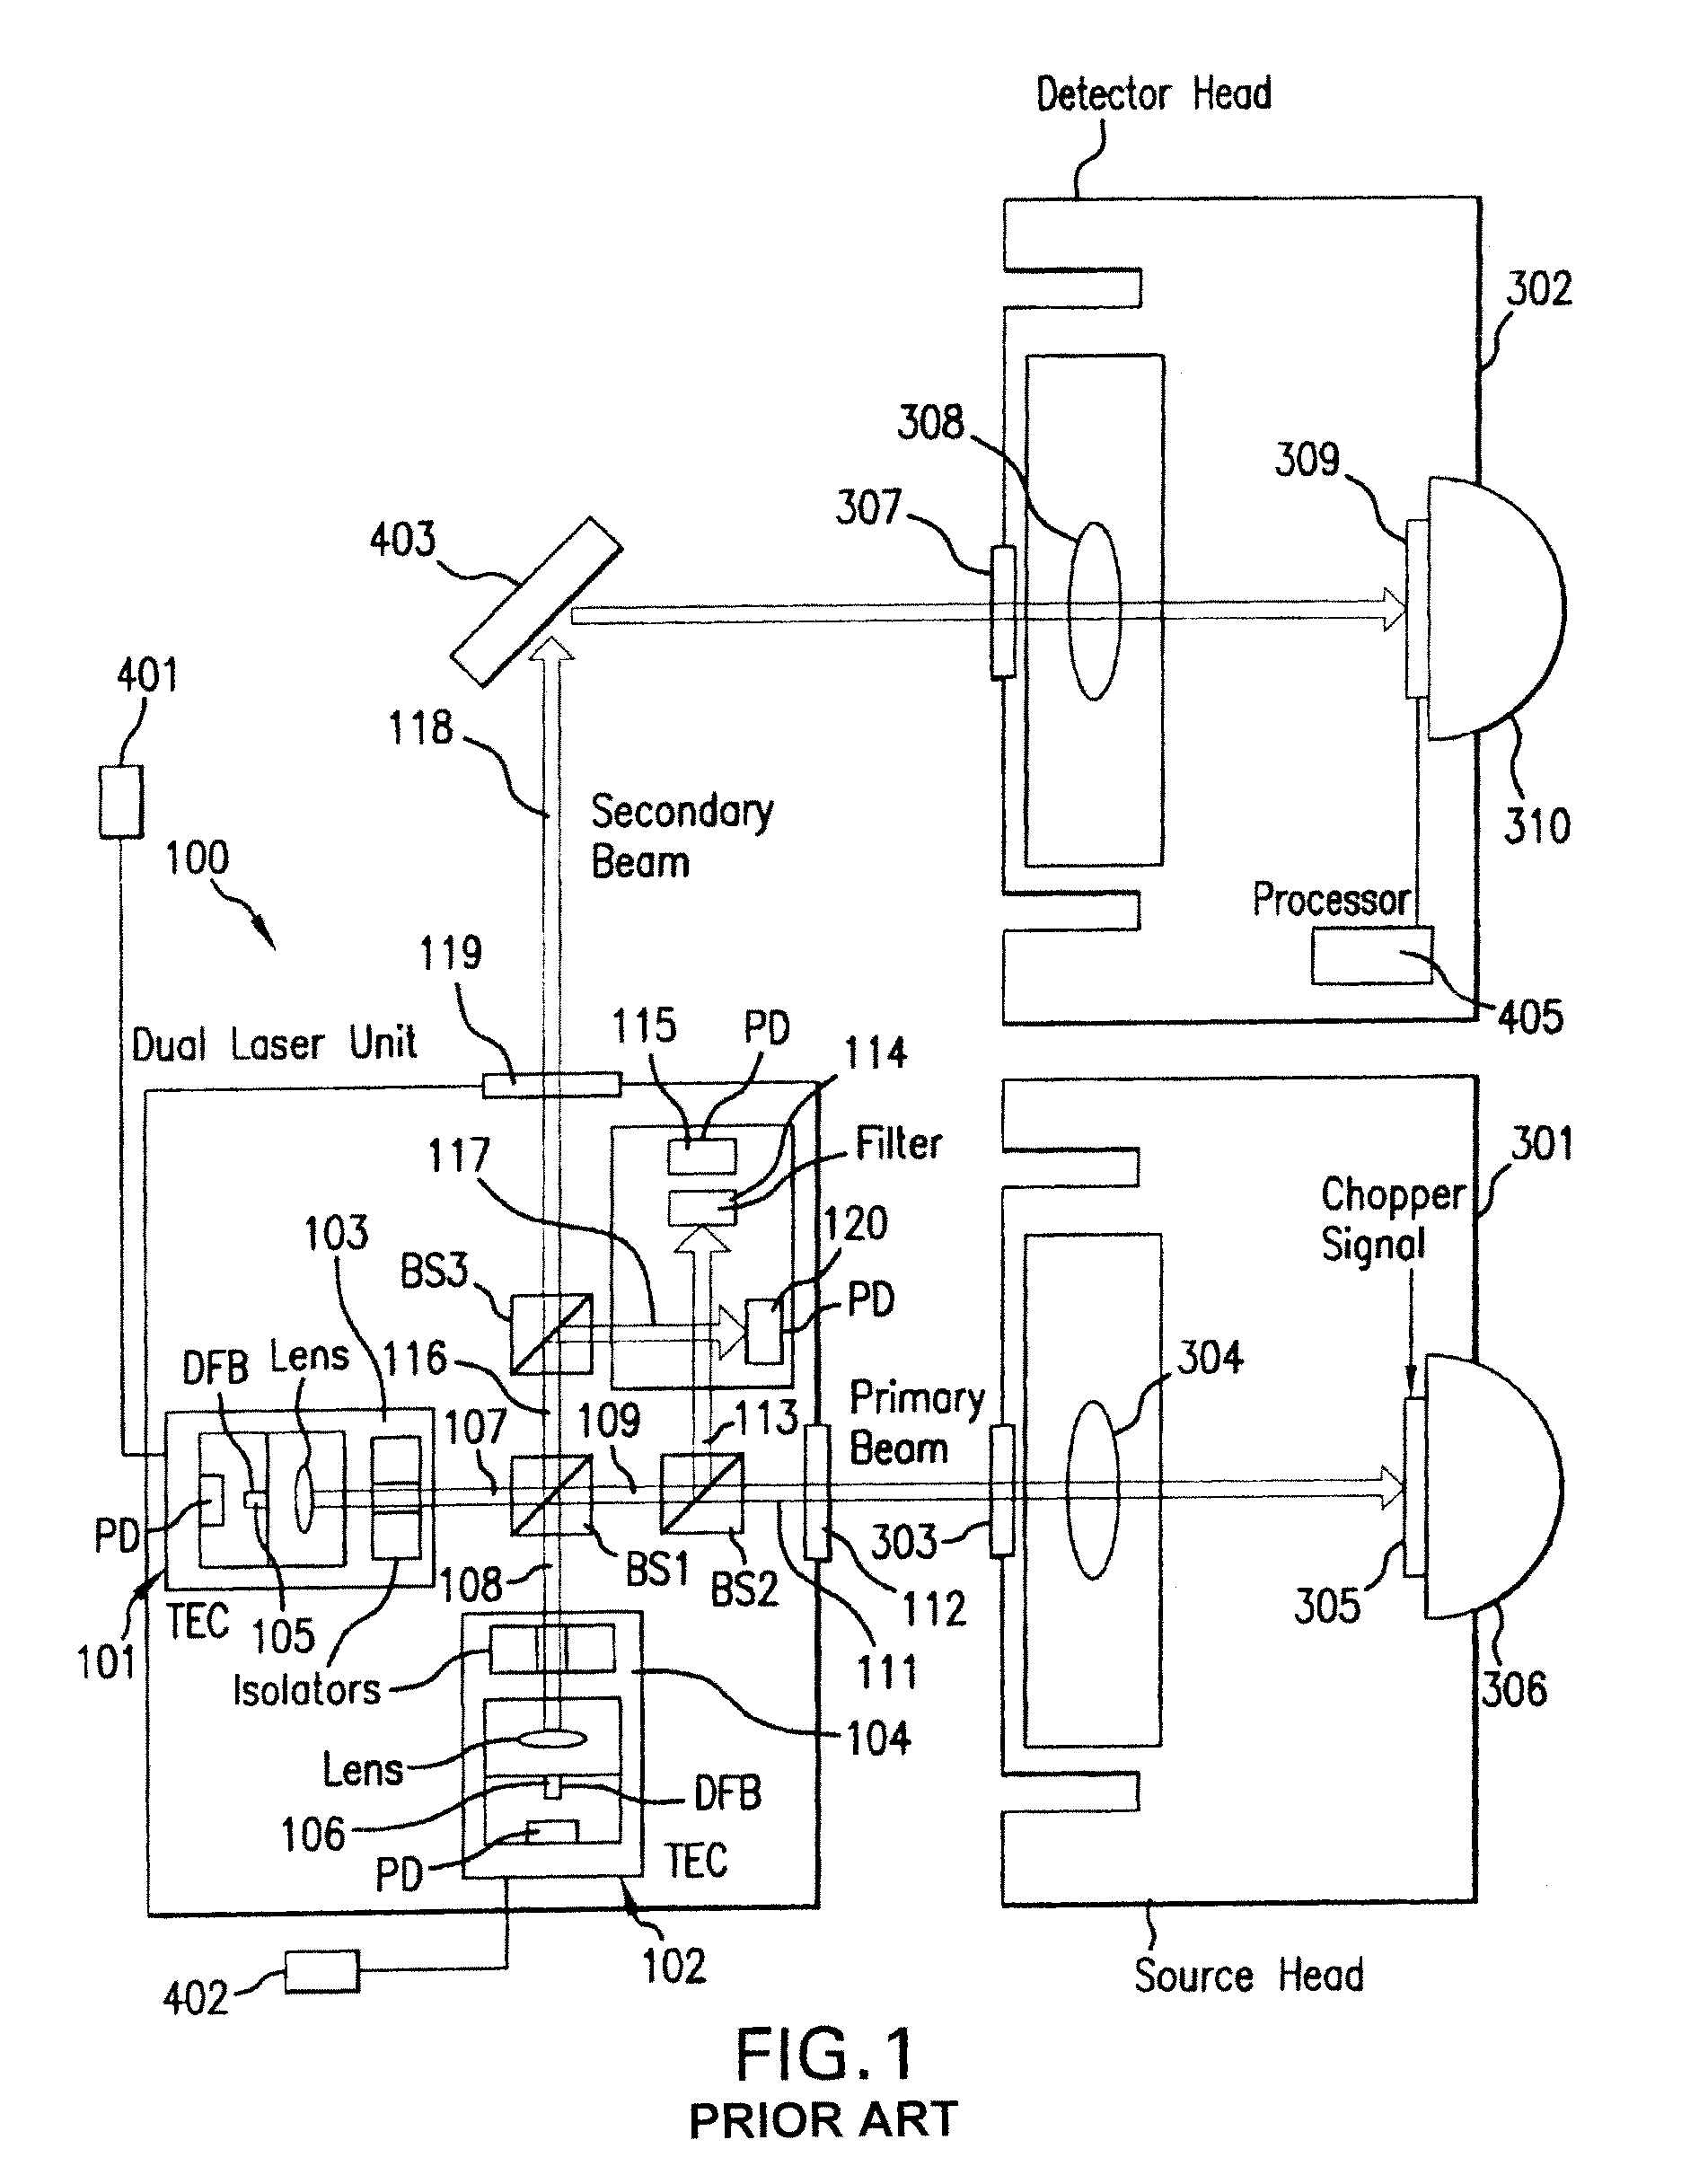 Terahertz frequency domain spectrometer with controllable phase shift